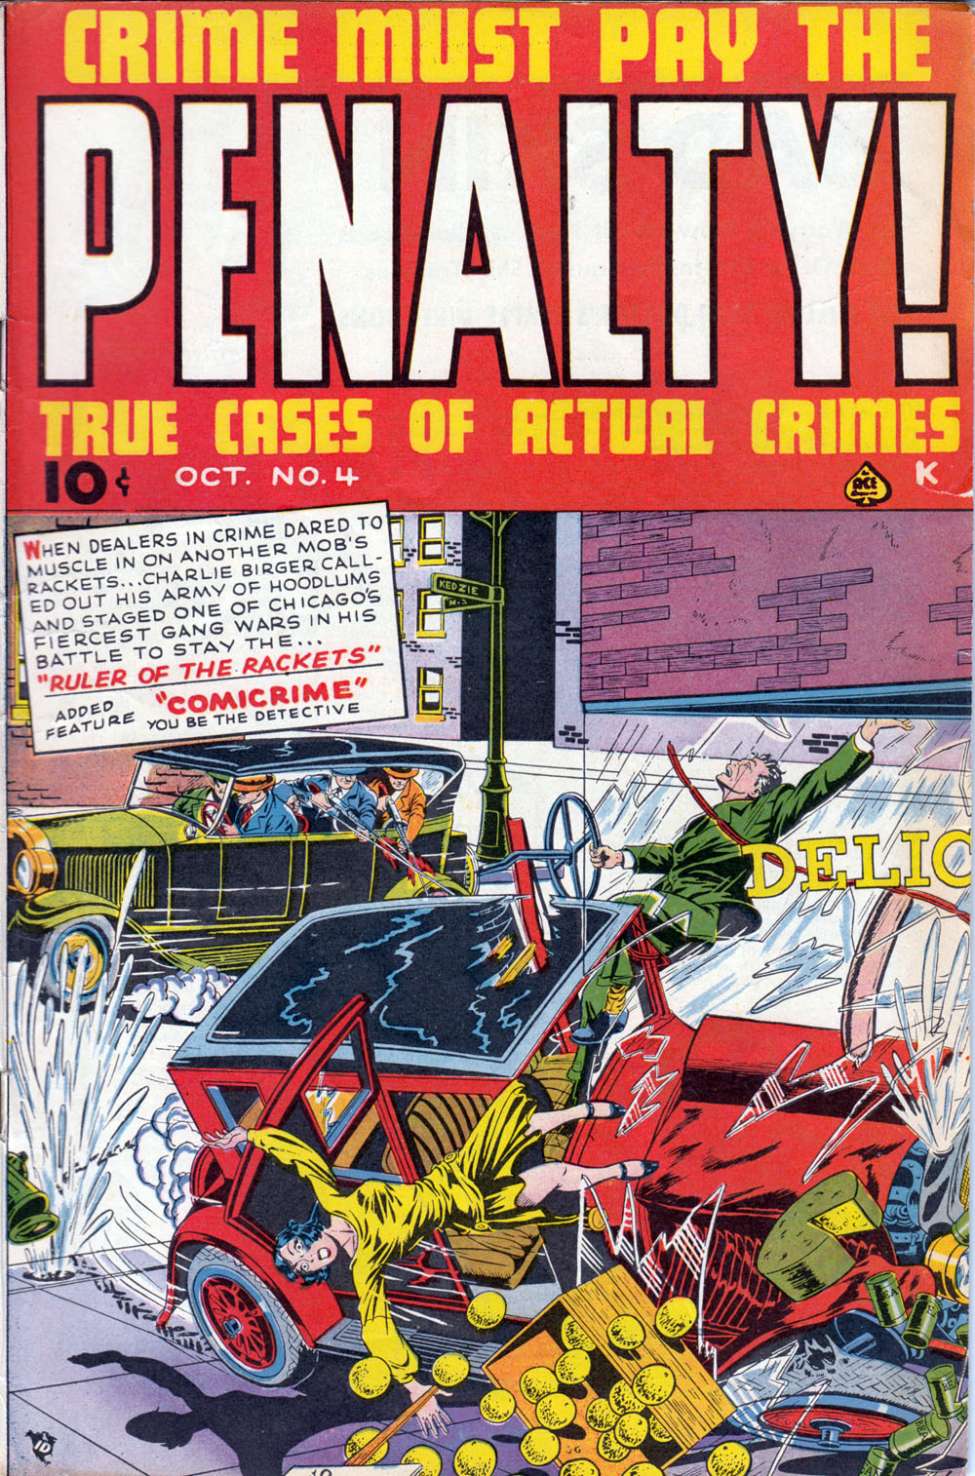 Comic Book Cover For Crime Must Pay the Penalty 4